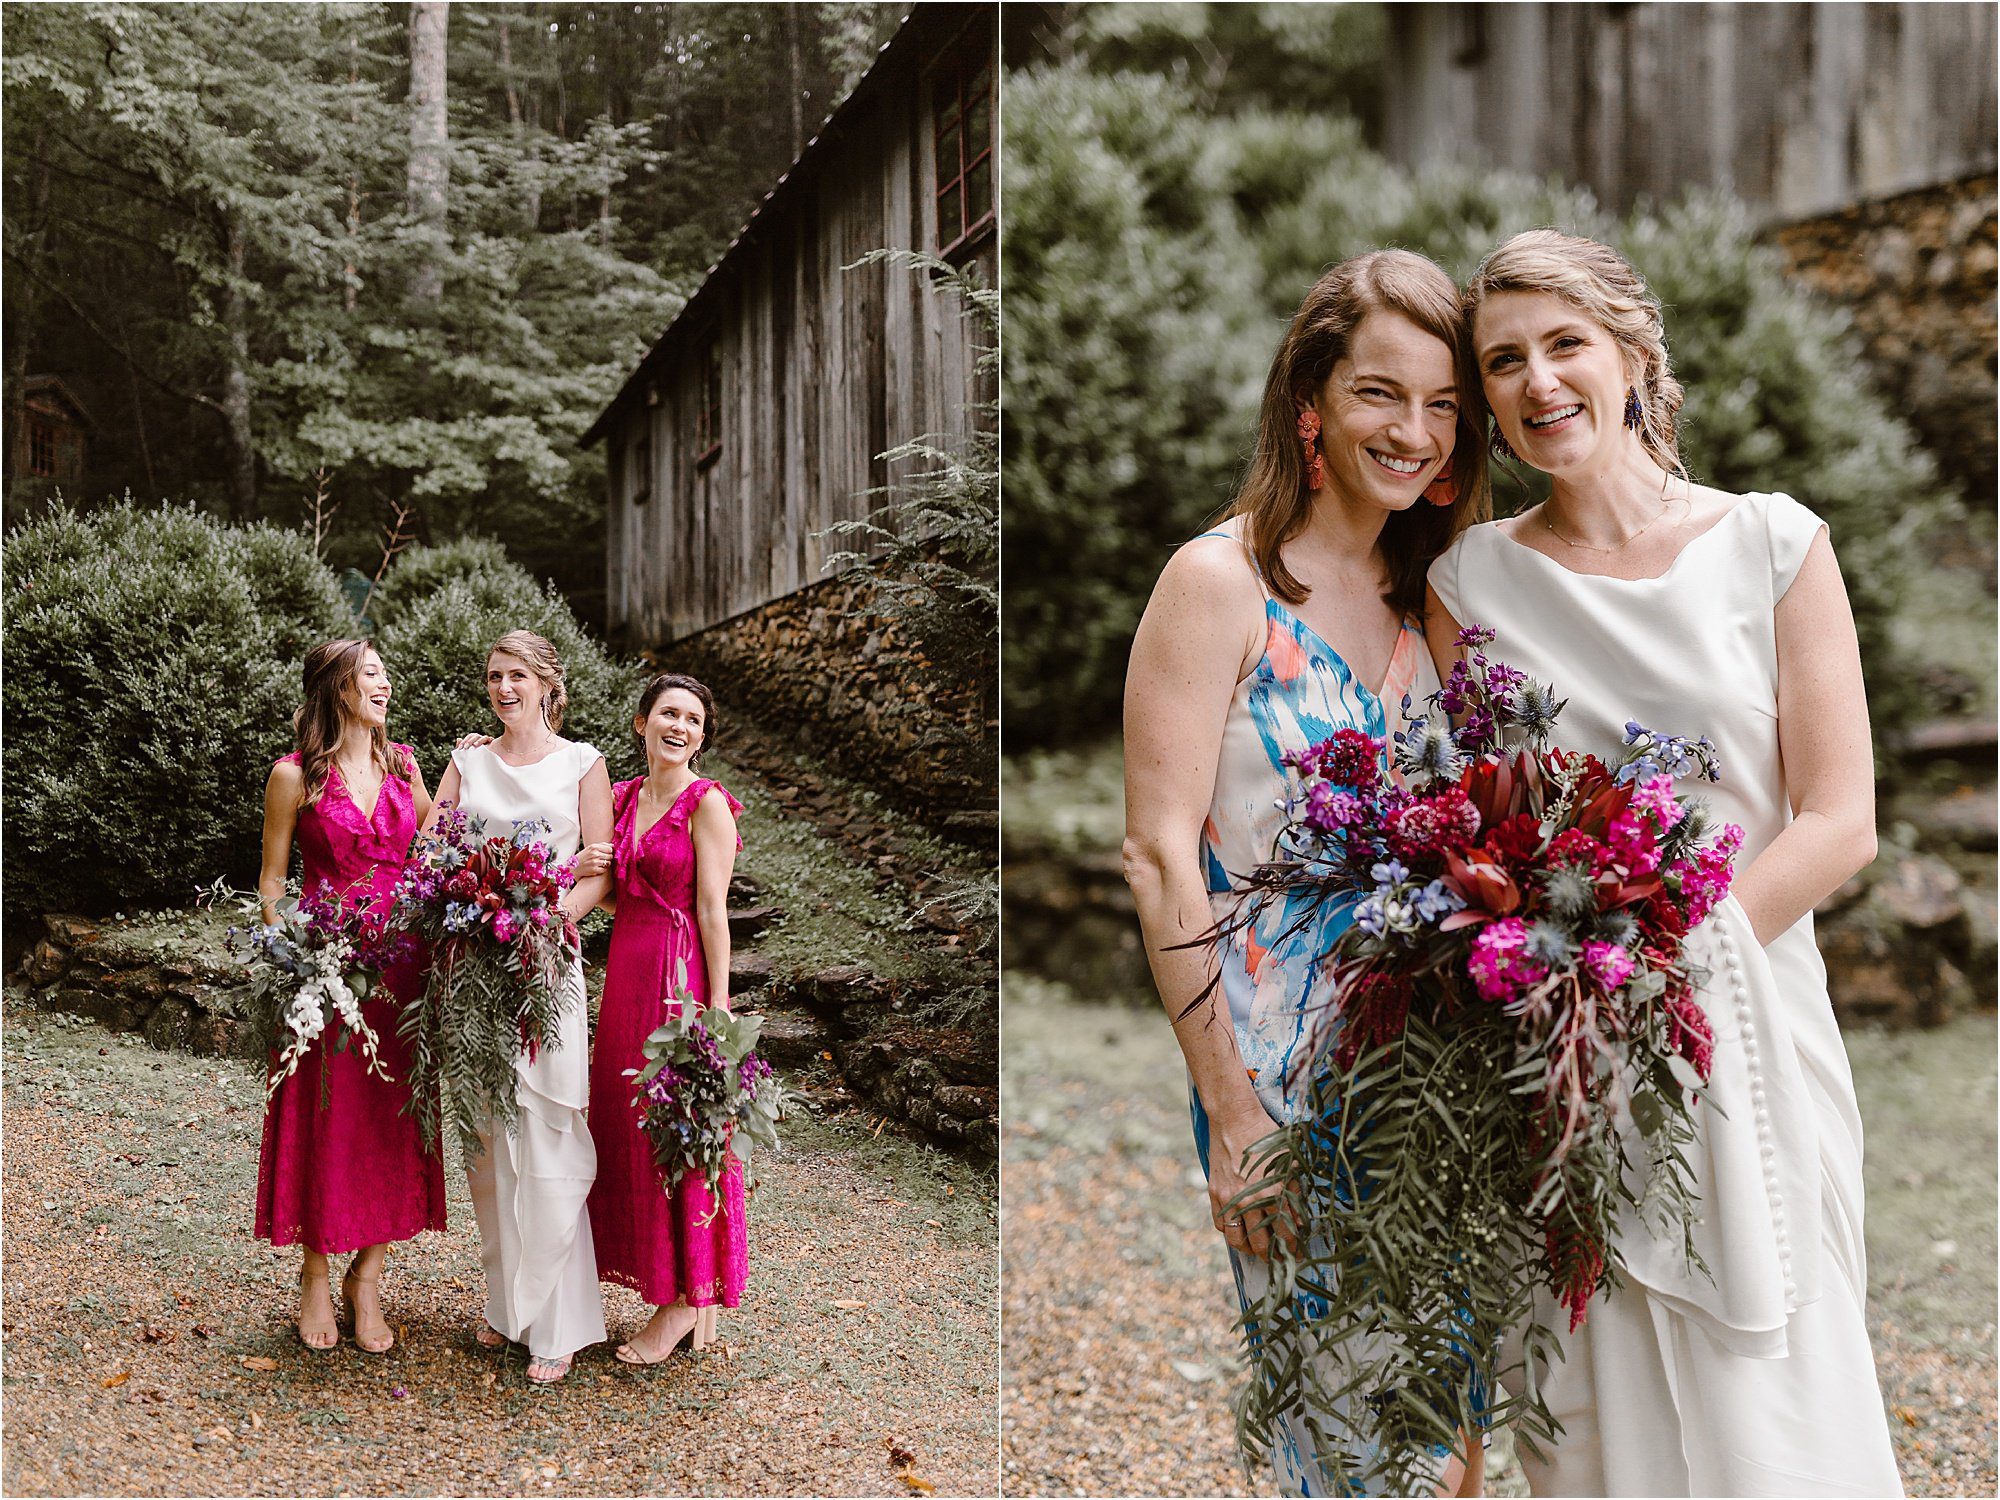 colorful bridesmaids dresses at wildflower wedding theme